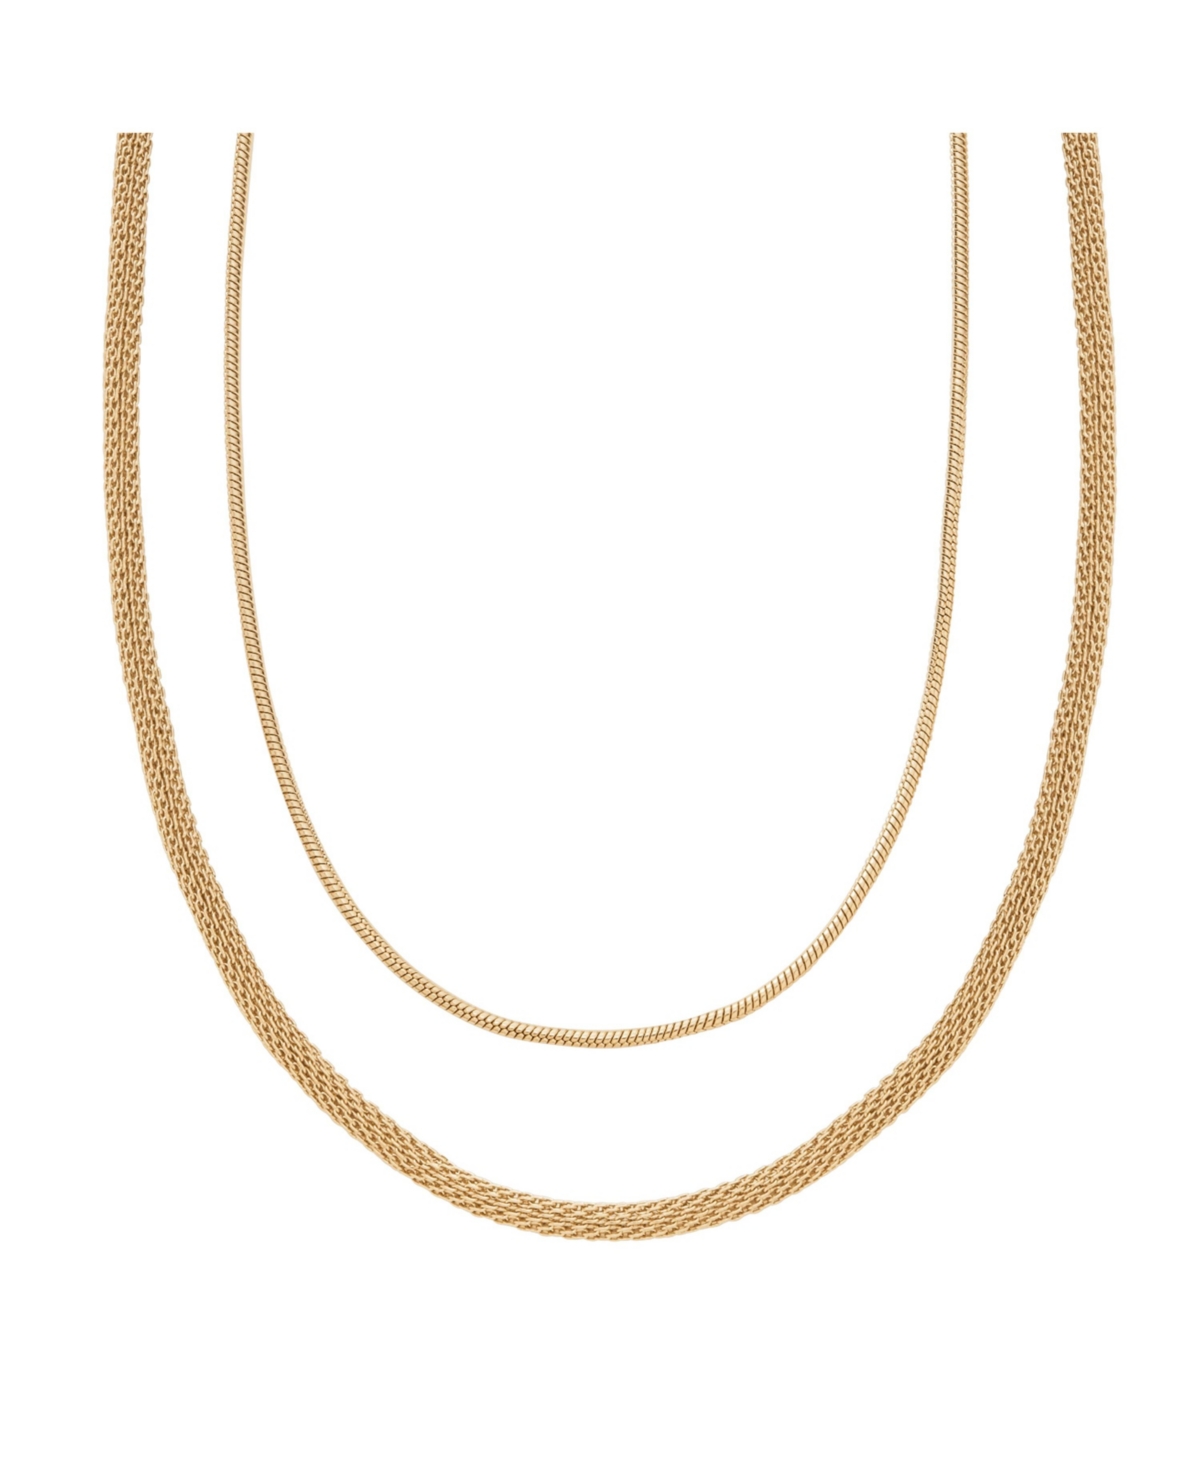 Women's Merete Gold-Tone Stainless Steel Multi Strand Necklace - Gold